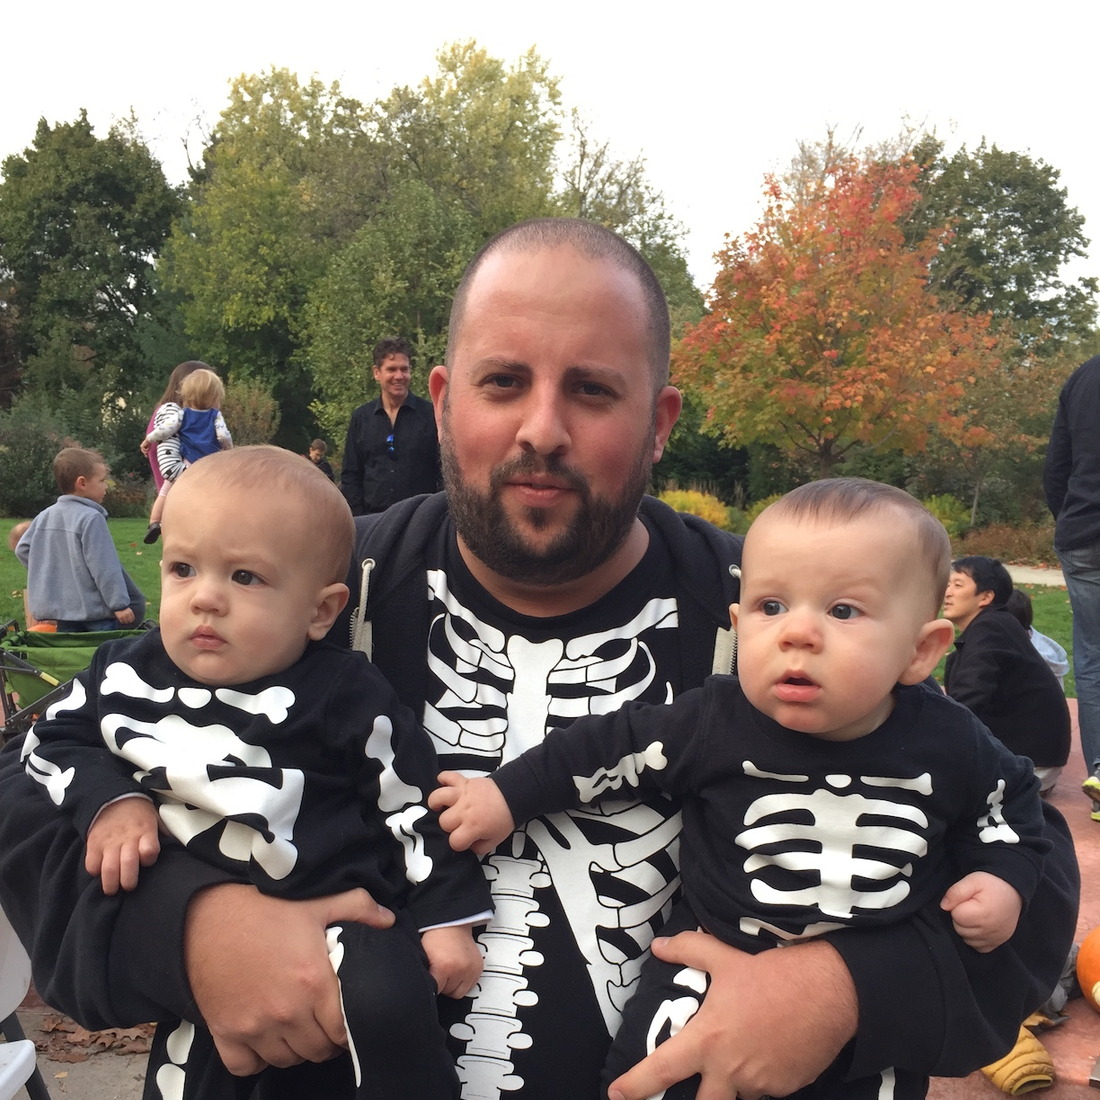 A man holding 2 babies, standing outside, all three wearing skeleton t-shirts